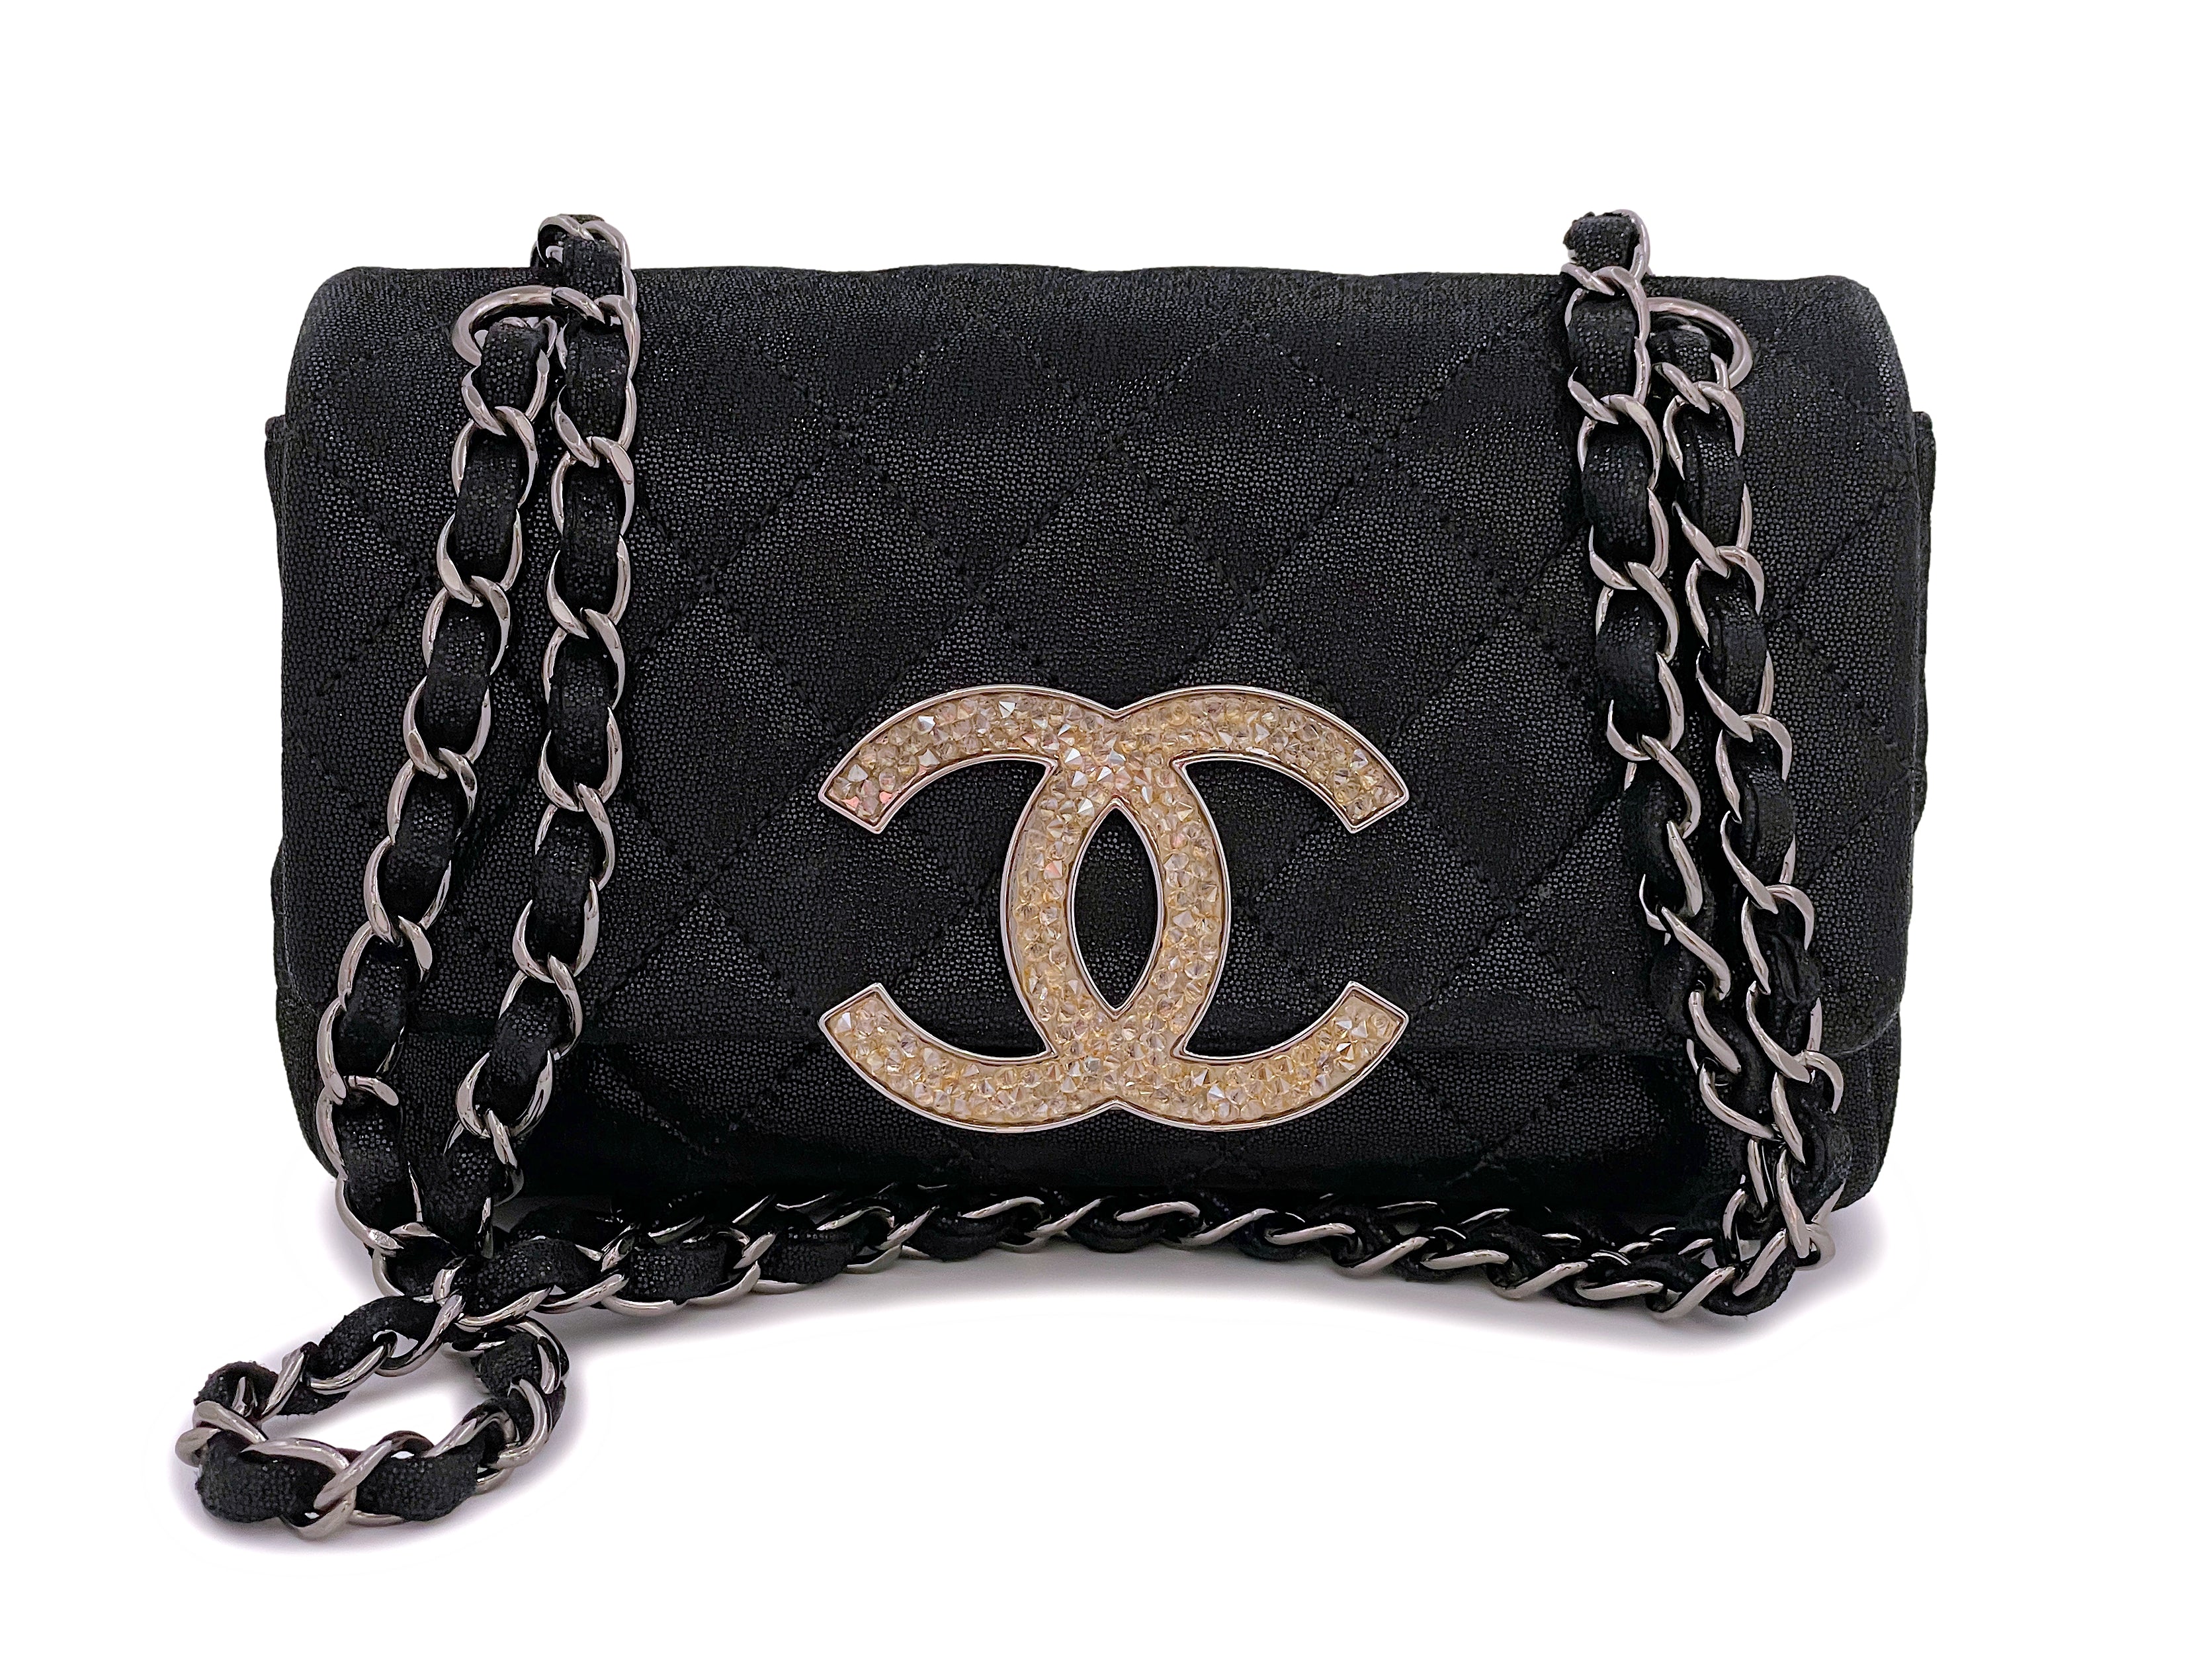 Chanel 11A Black Champagne Strass Crystals Rectangular Mini Flap